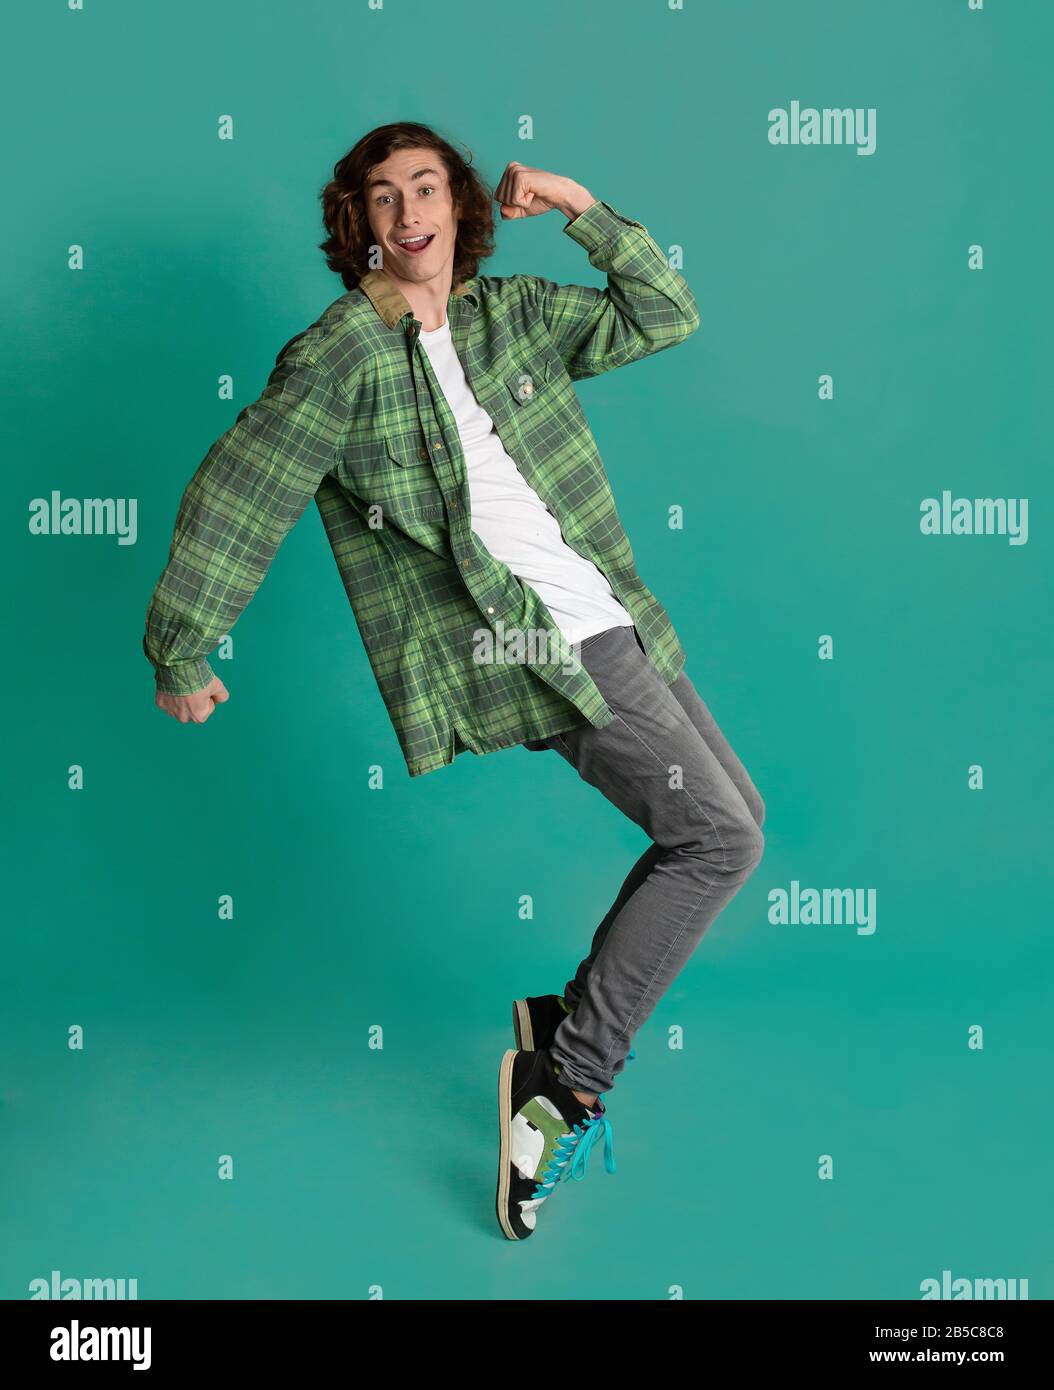 Happy young man standing on tiptoes against turquoise background Stock Photo